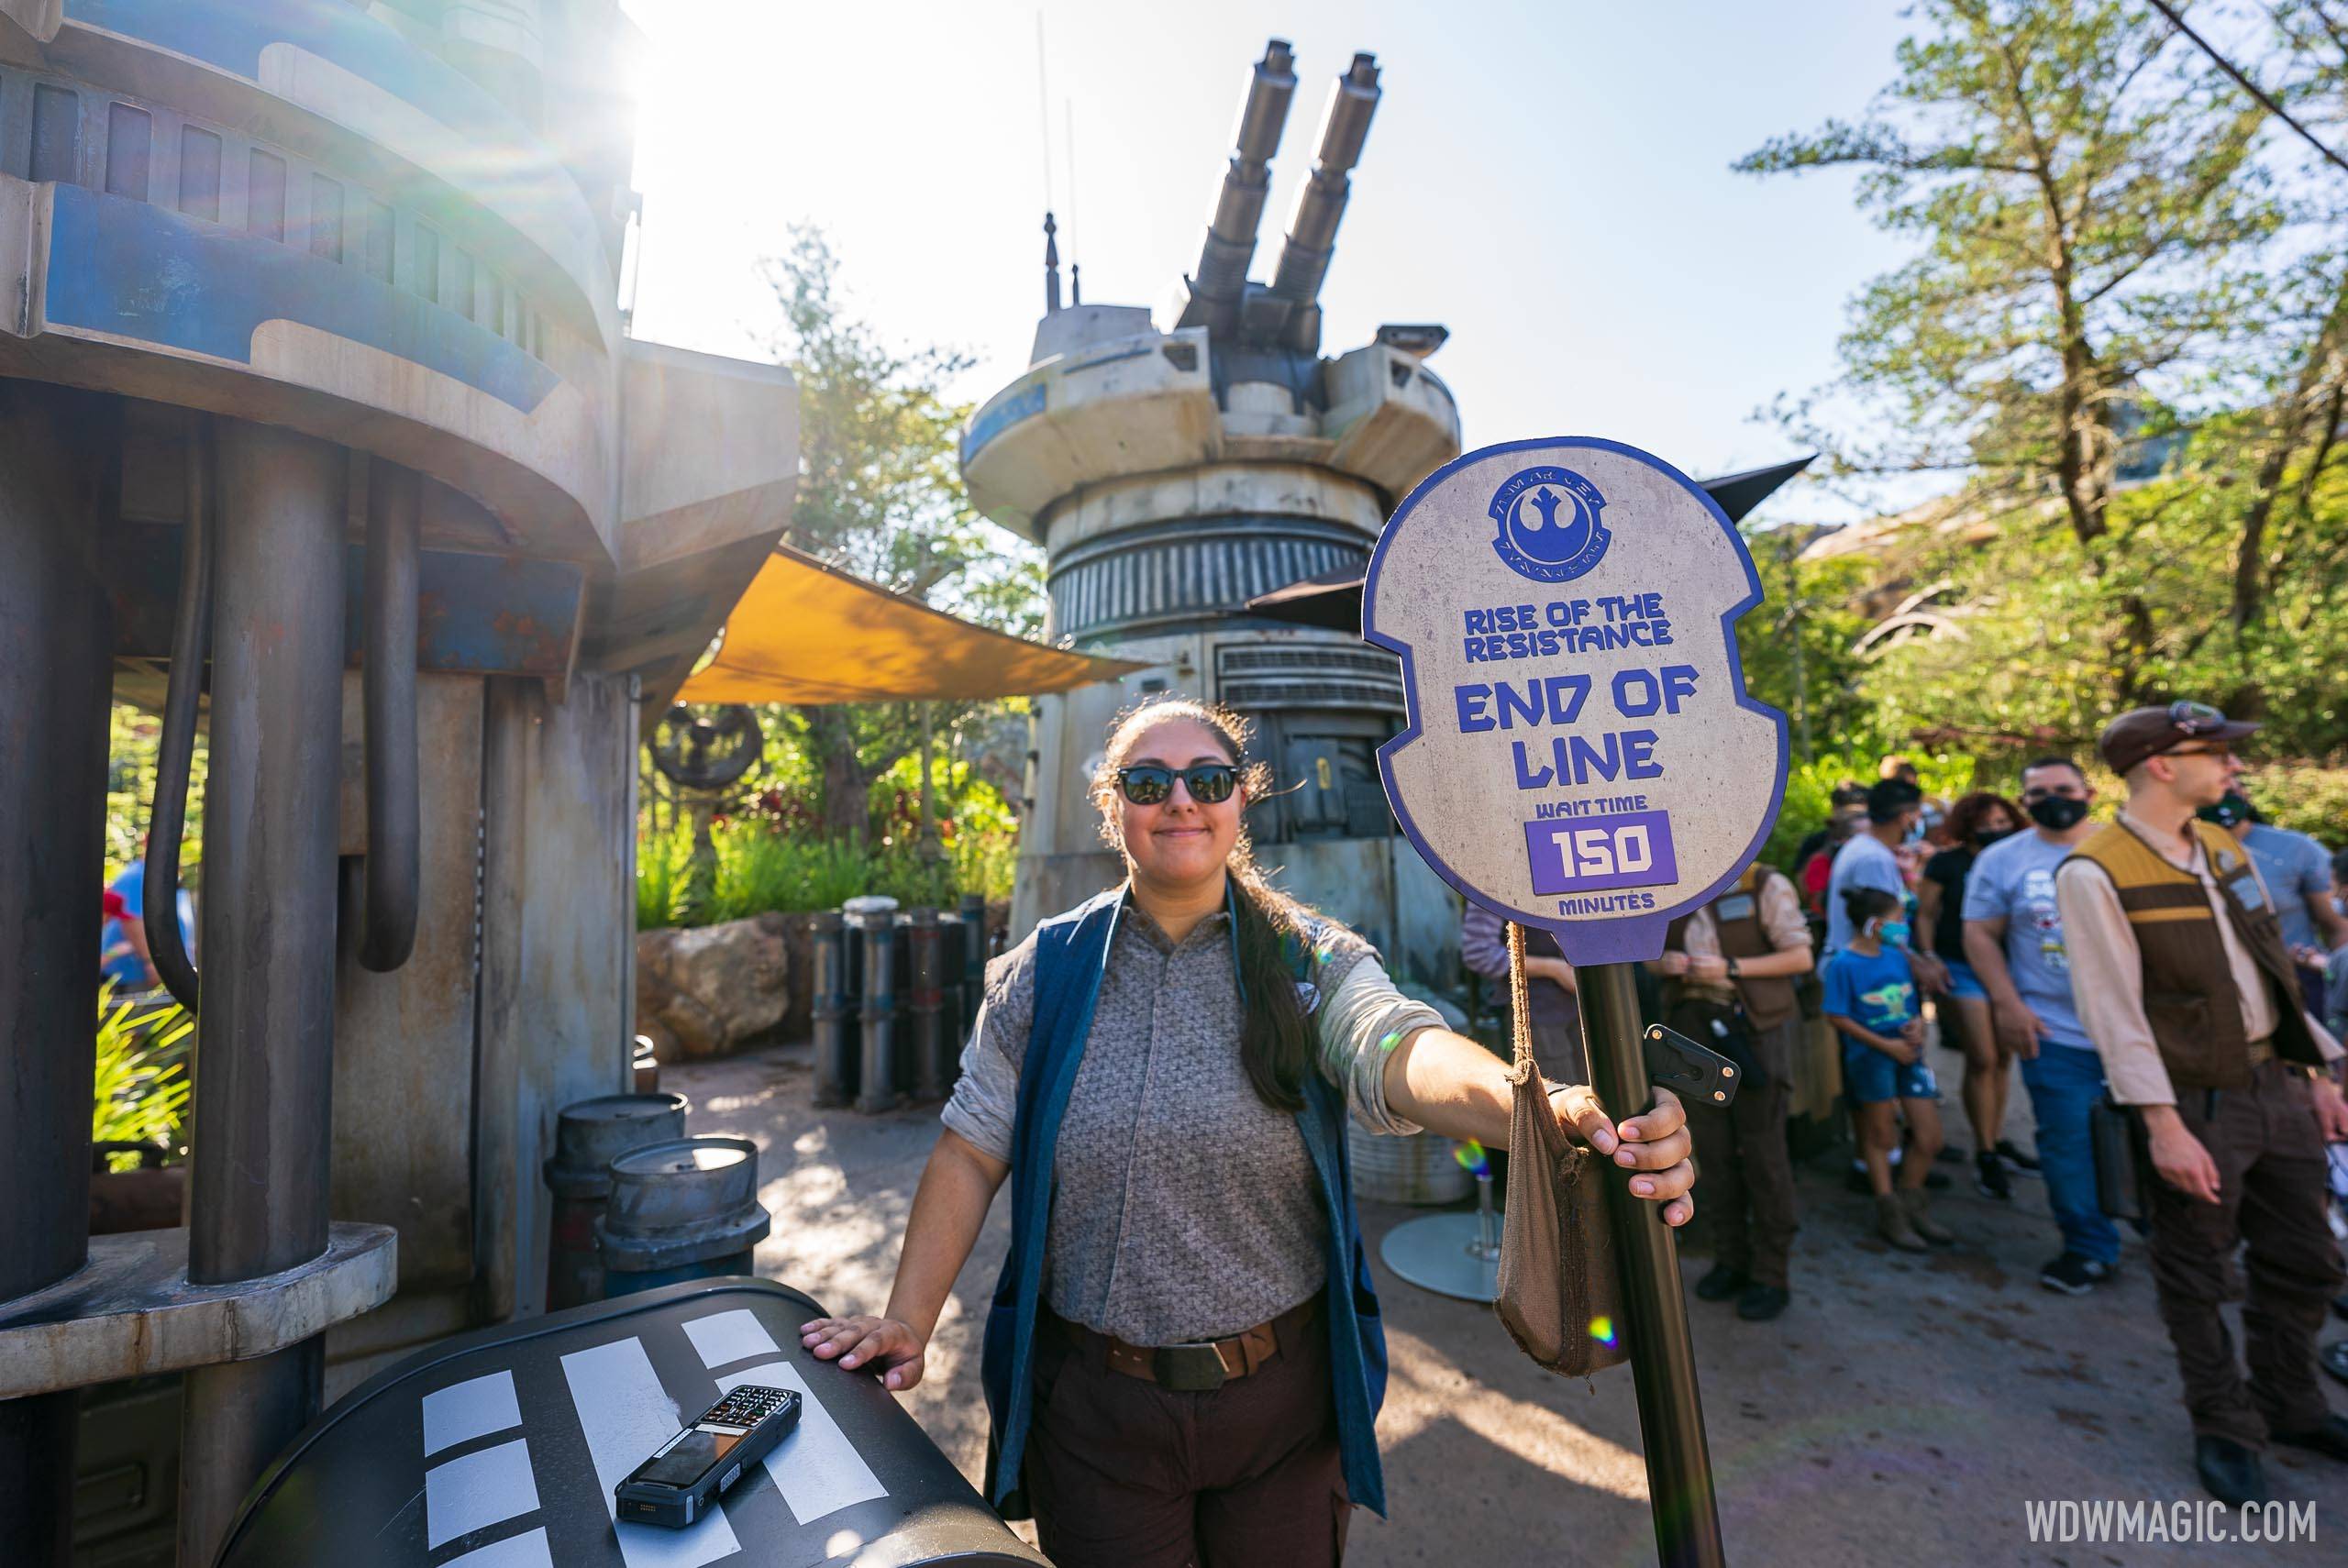 Costumes in highly themed areas like Star Wars Galaxy's Edge should not be affected